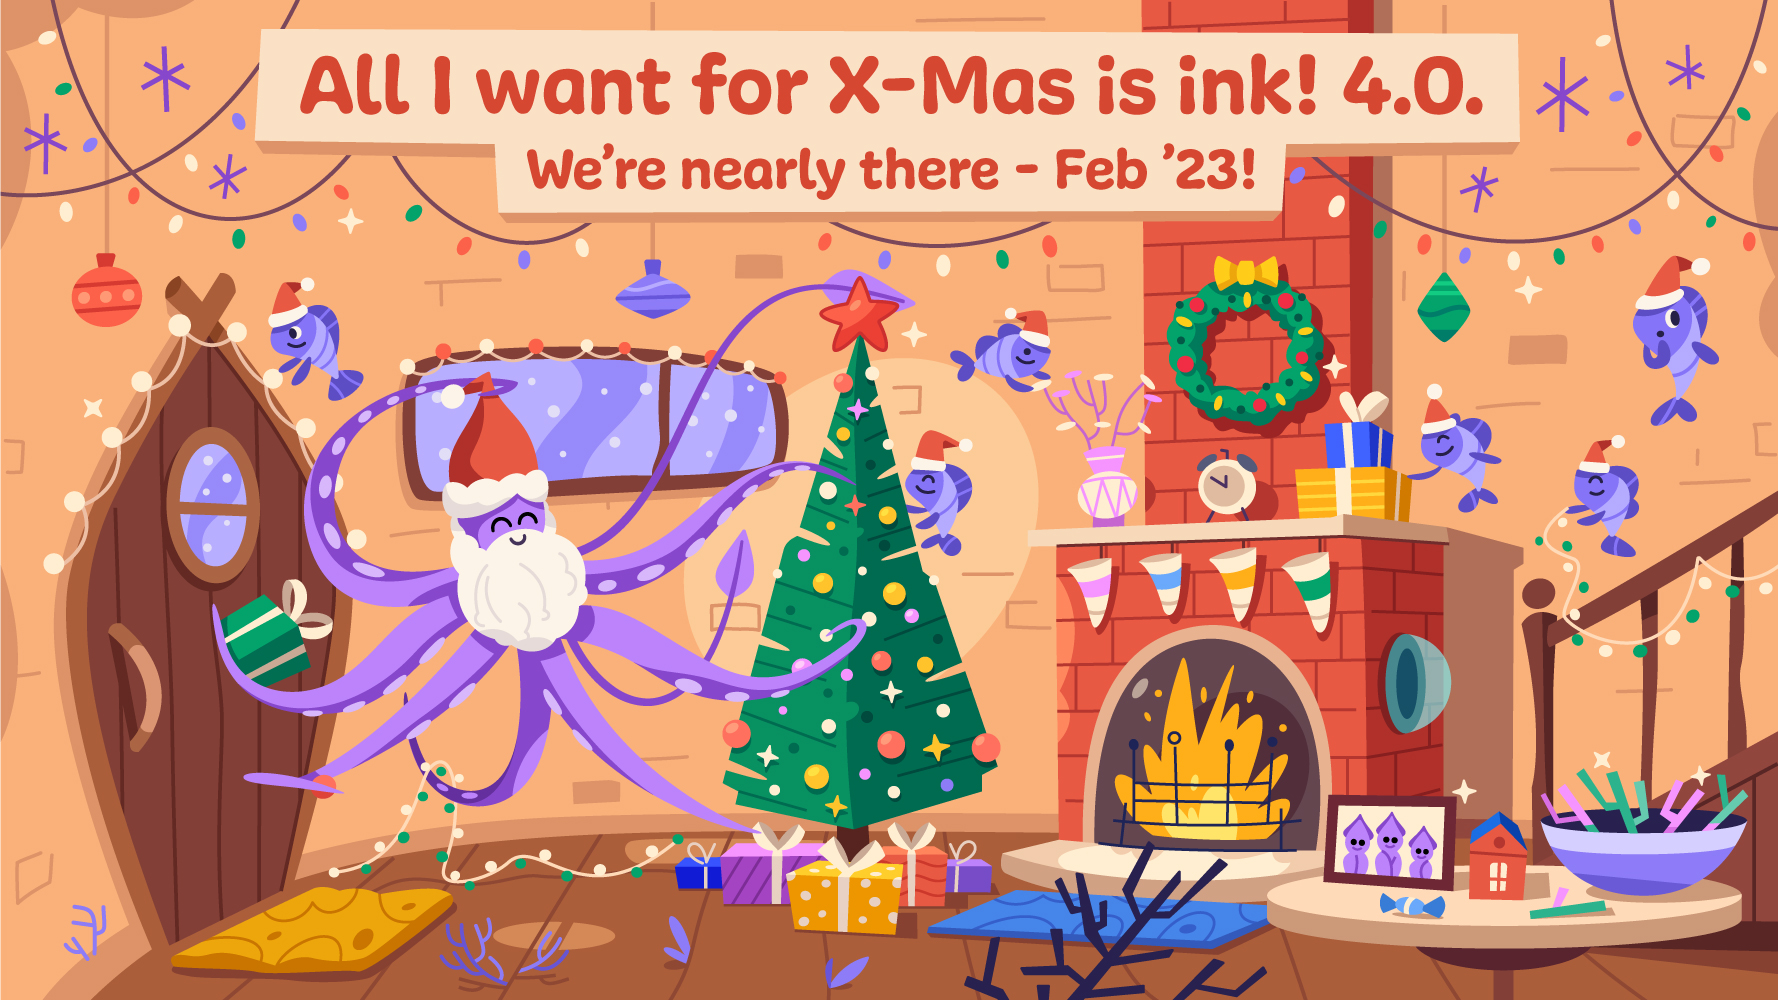 ink! Merry Christmas!